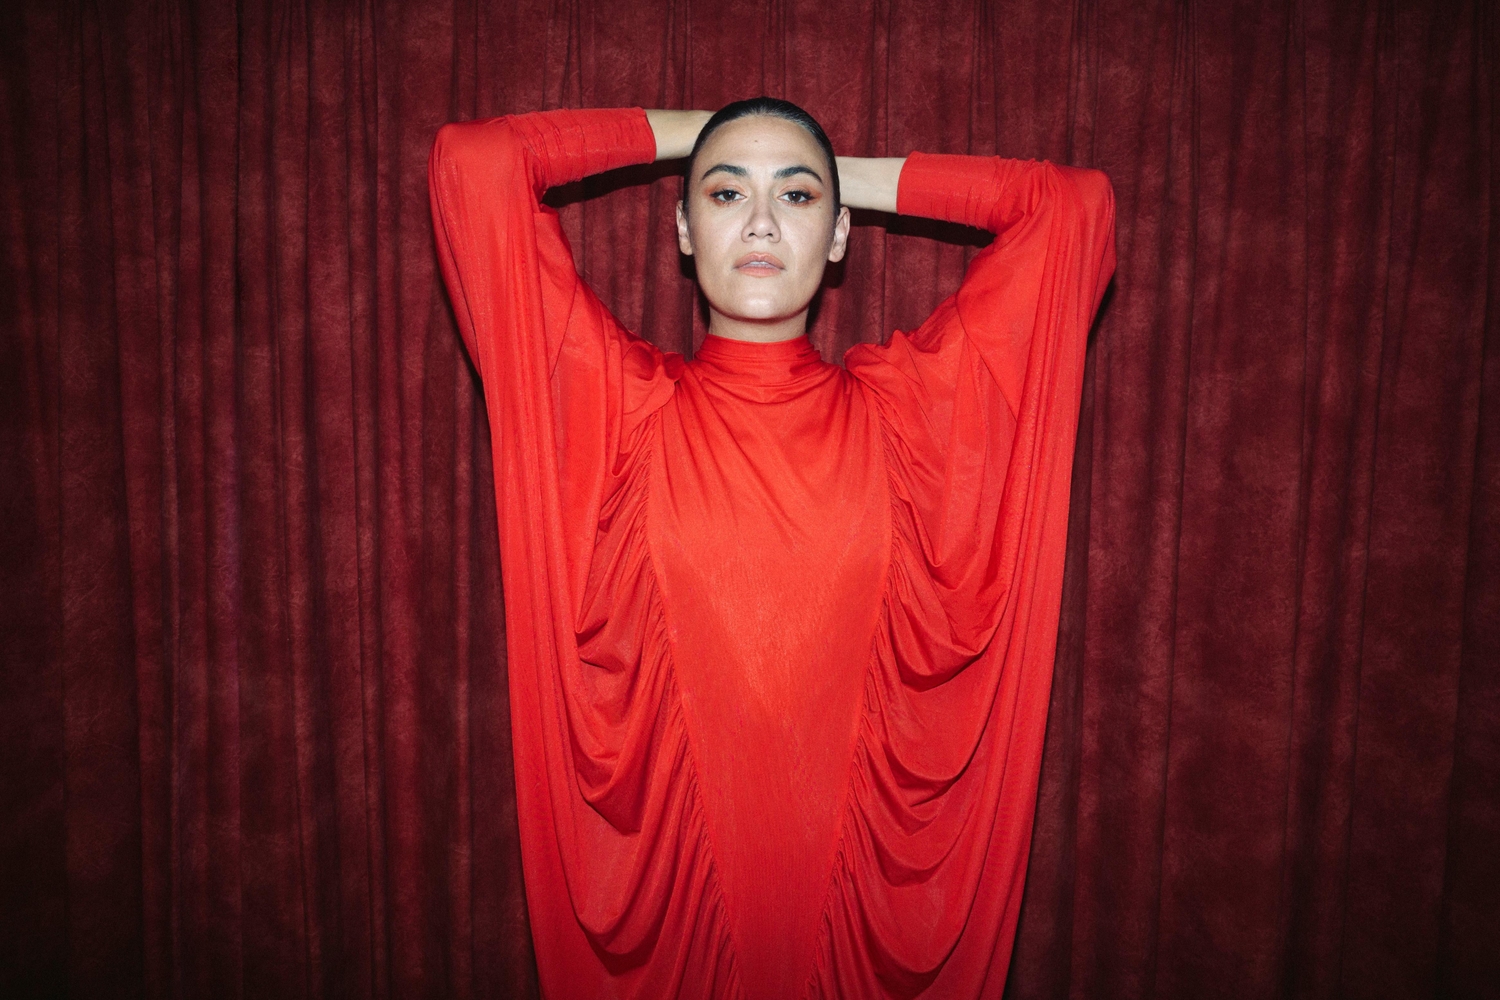 Nadine Shah shares video for new single 'Twenty Things' and announces UK tour